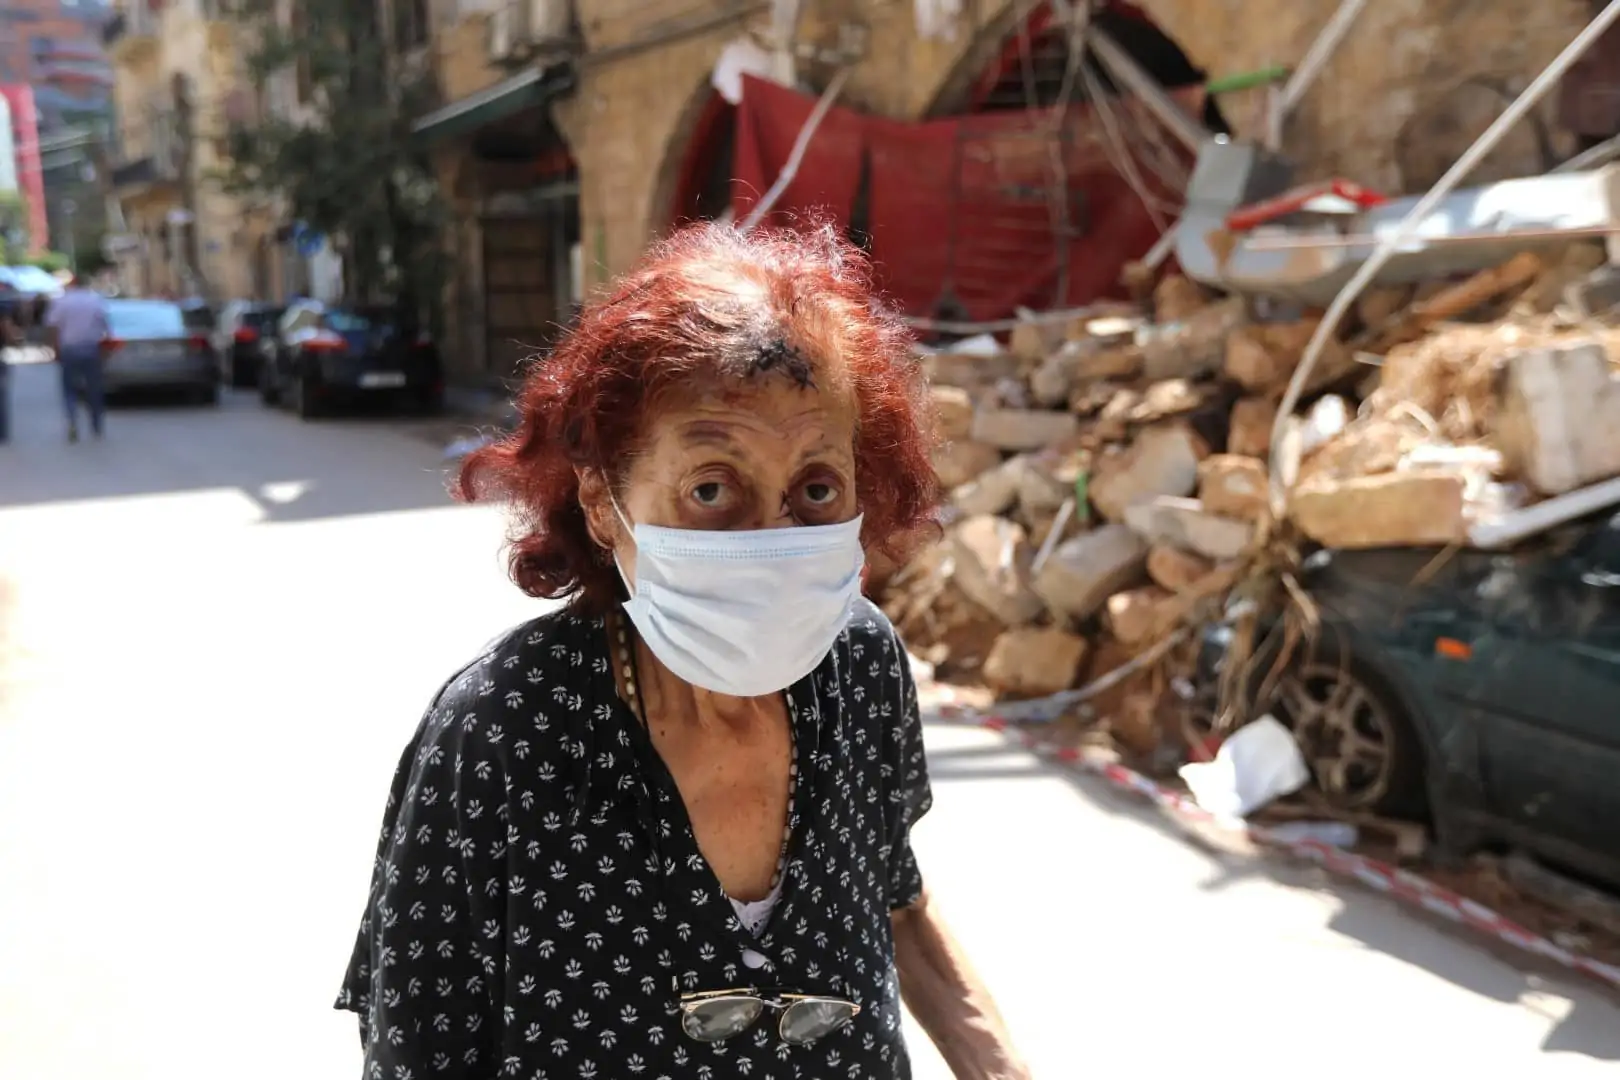 A woman, who says she was injured following Tuesday's blast, walks past damage along a street in Beirut, Lebanon, August 10, 2020. REUTERS/Mohamed Azakir - RC21BI9WNNU8